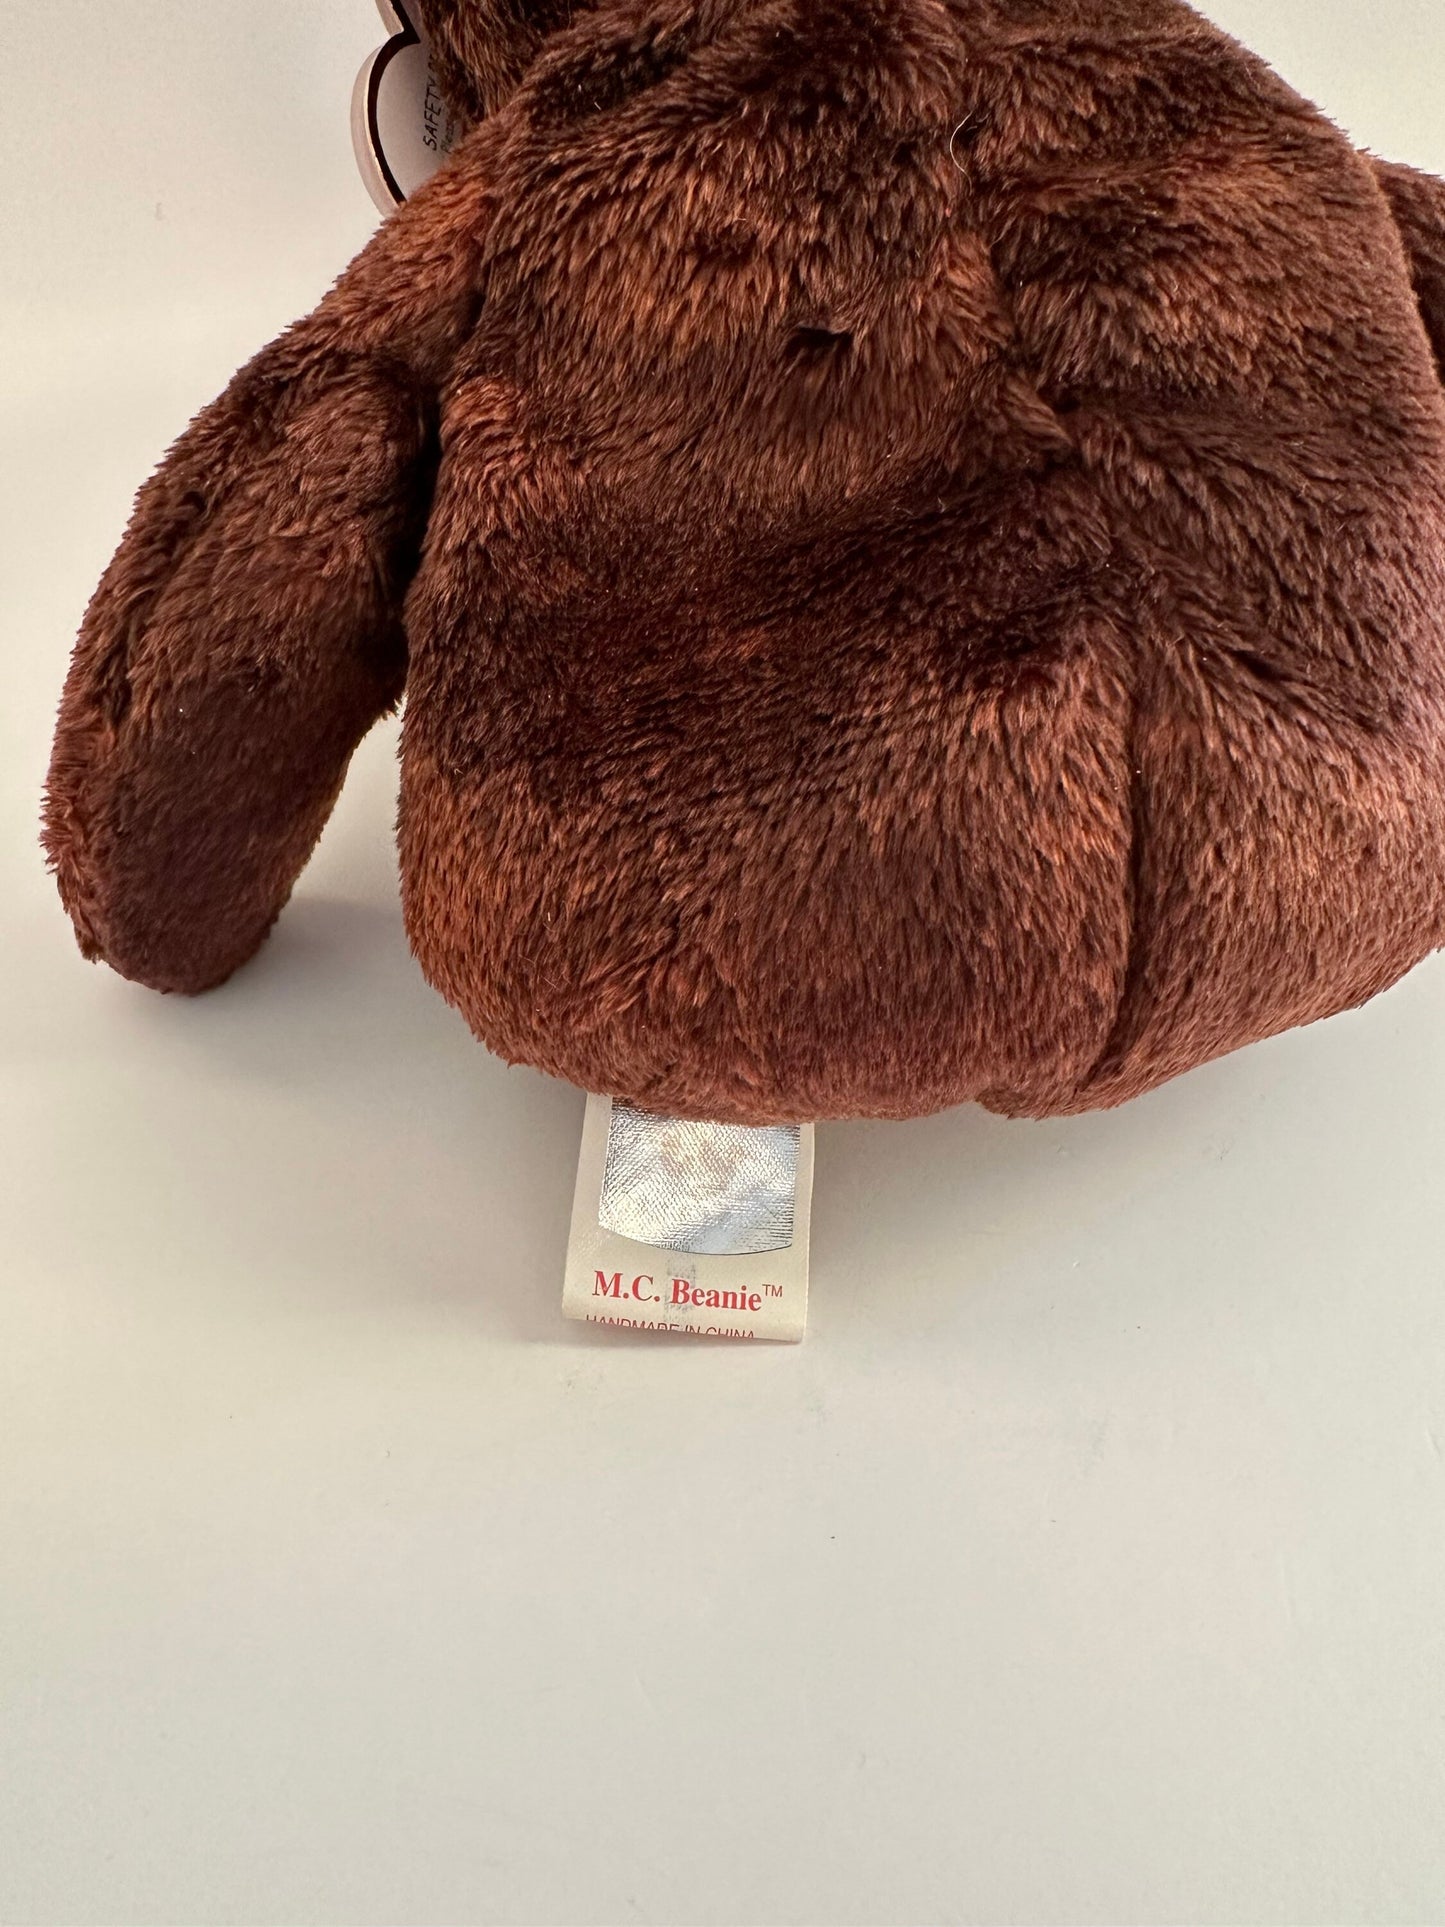 Ty Beanie Baby “M.C. Beanie” the MasterCard Bear- Credit Card Exclusive (8.5 inch)